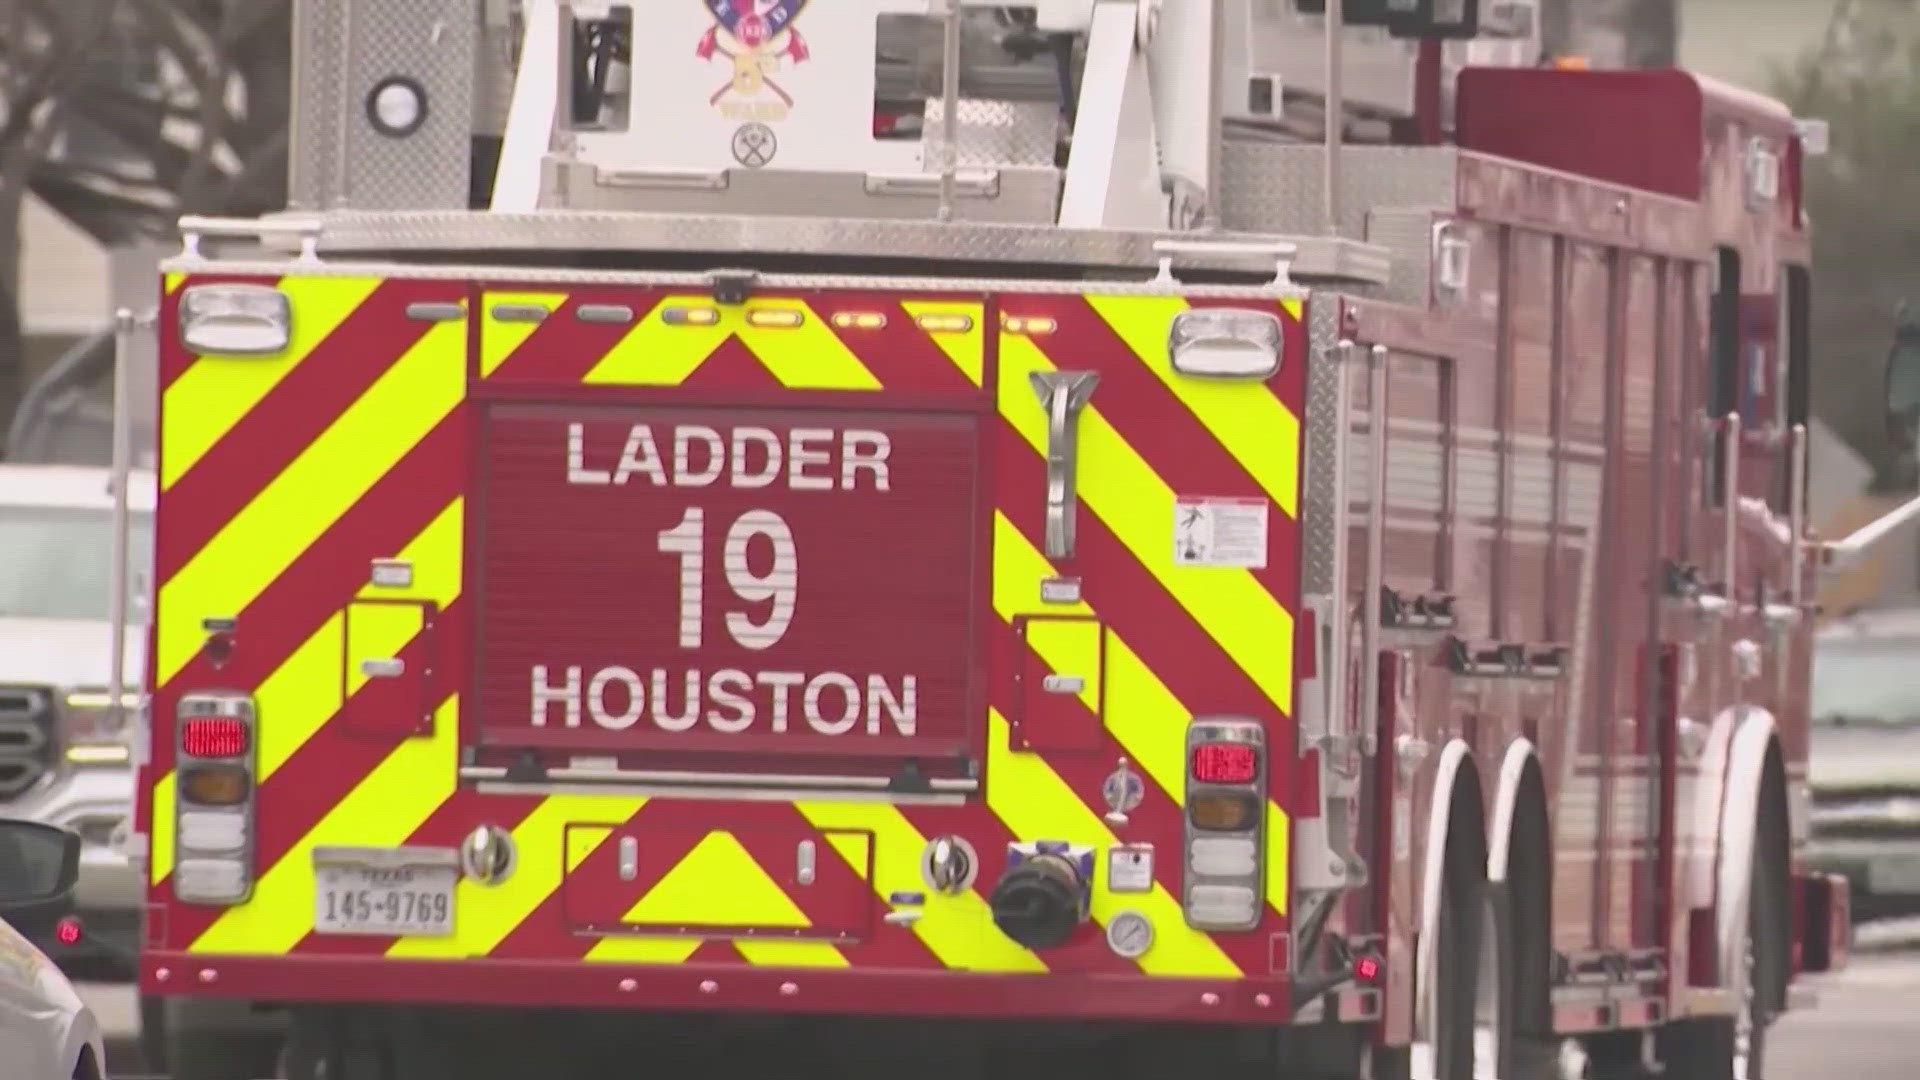 That agreement that was signed between Mayor John Whitmire and the Houston firefighters union includes $650 million in backpay and significant pay increases.